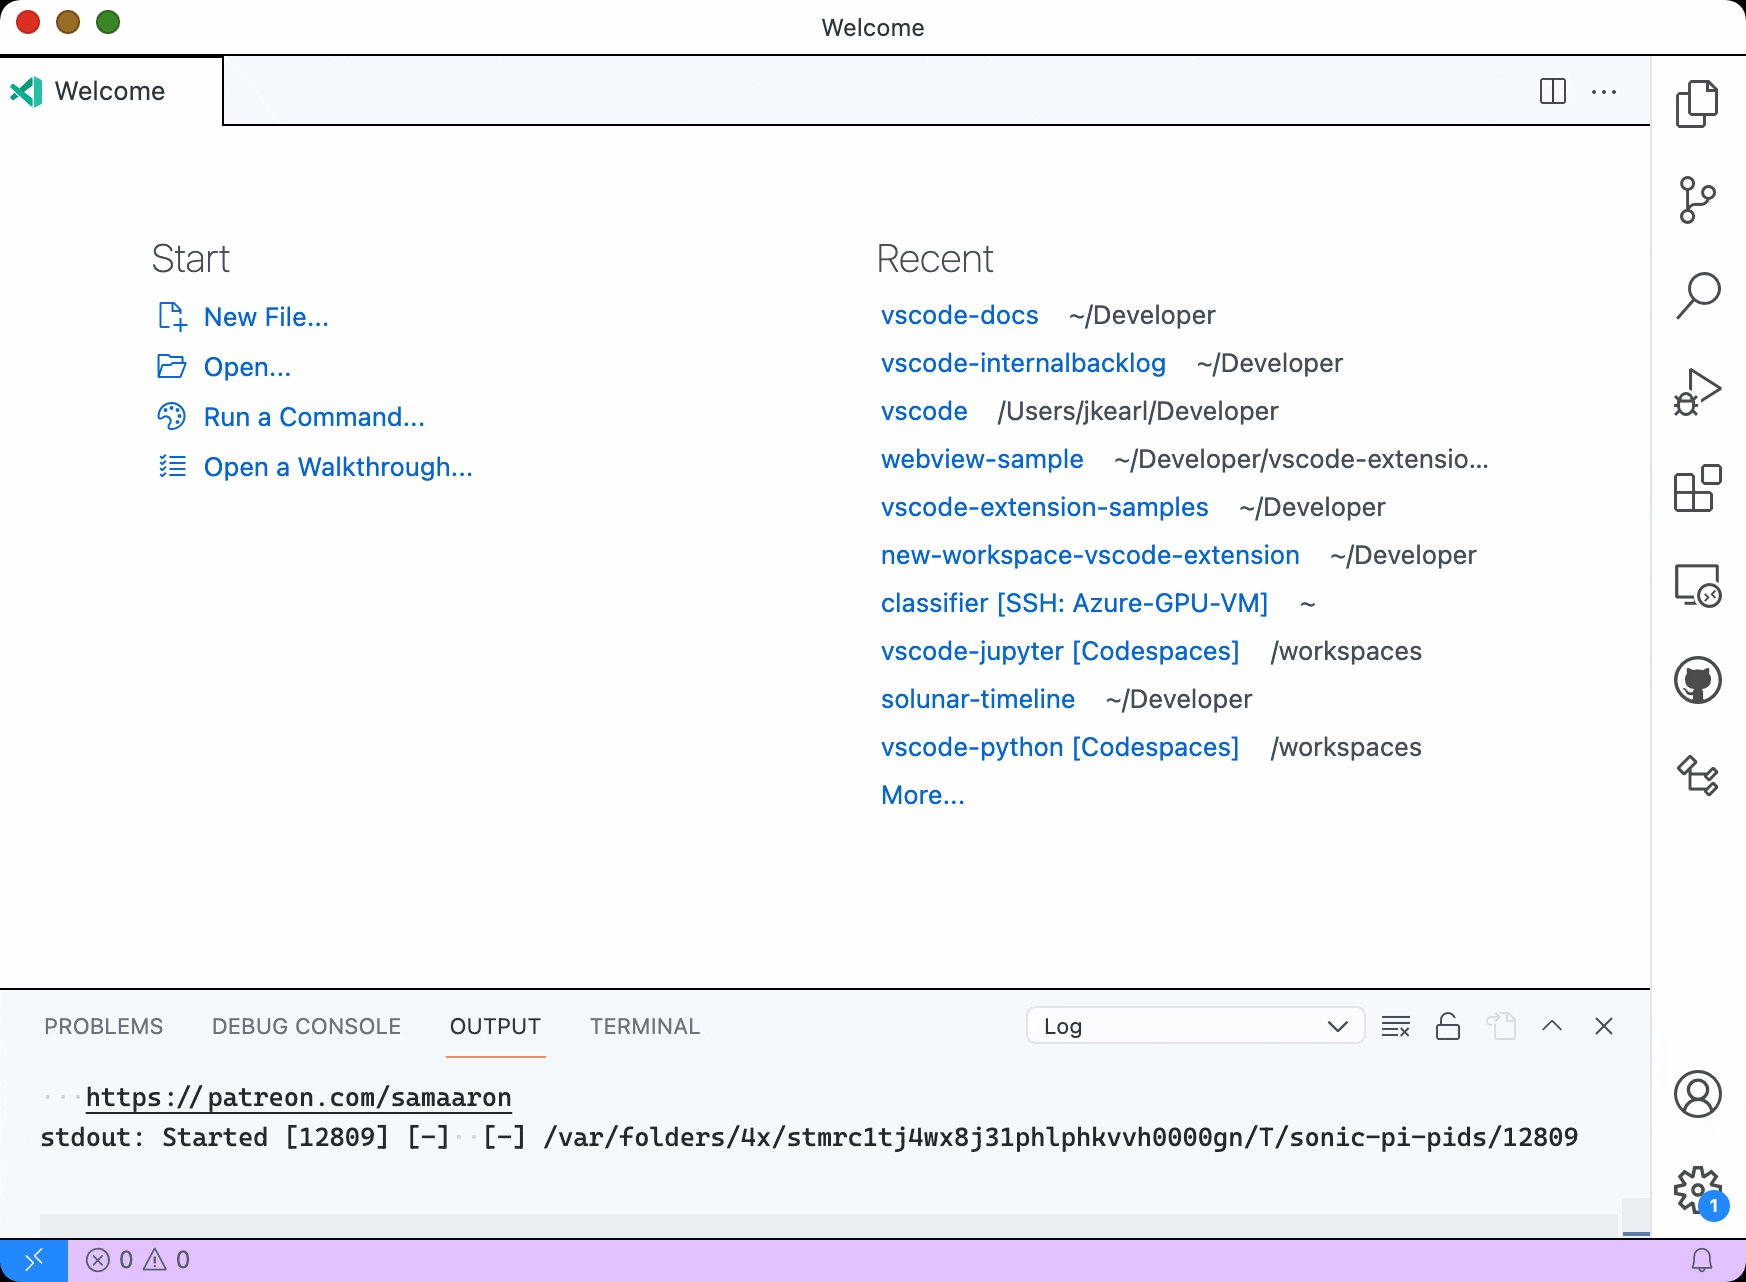 New File menu in use via Welcome page